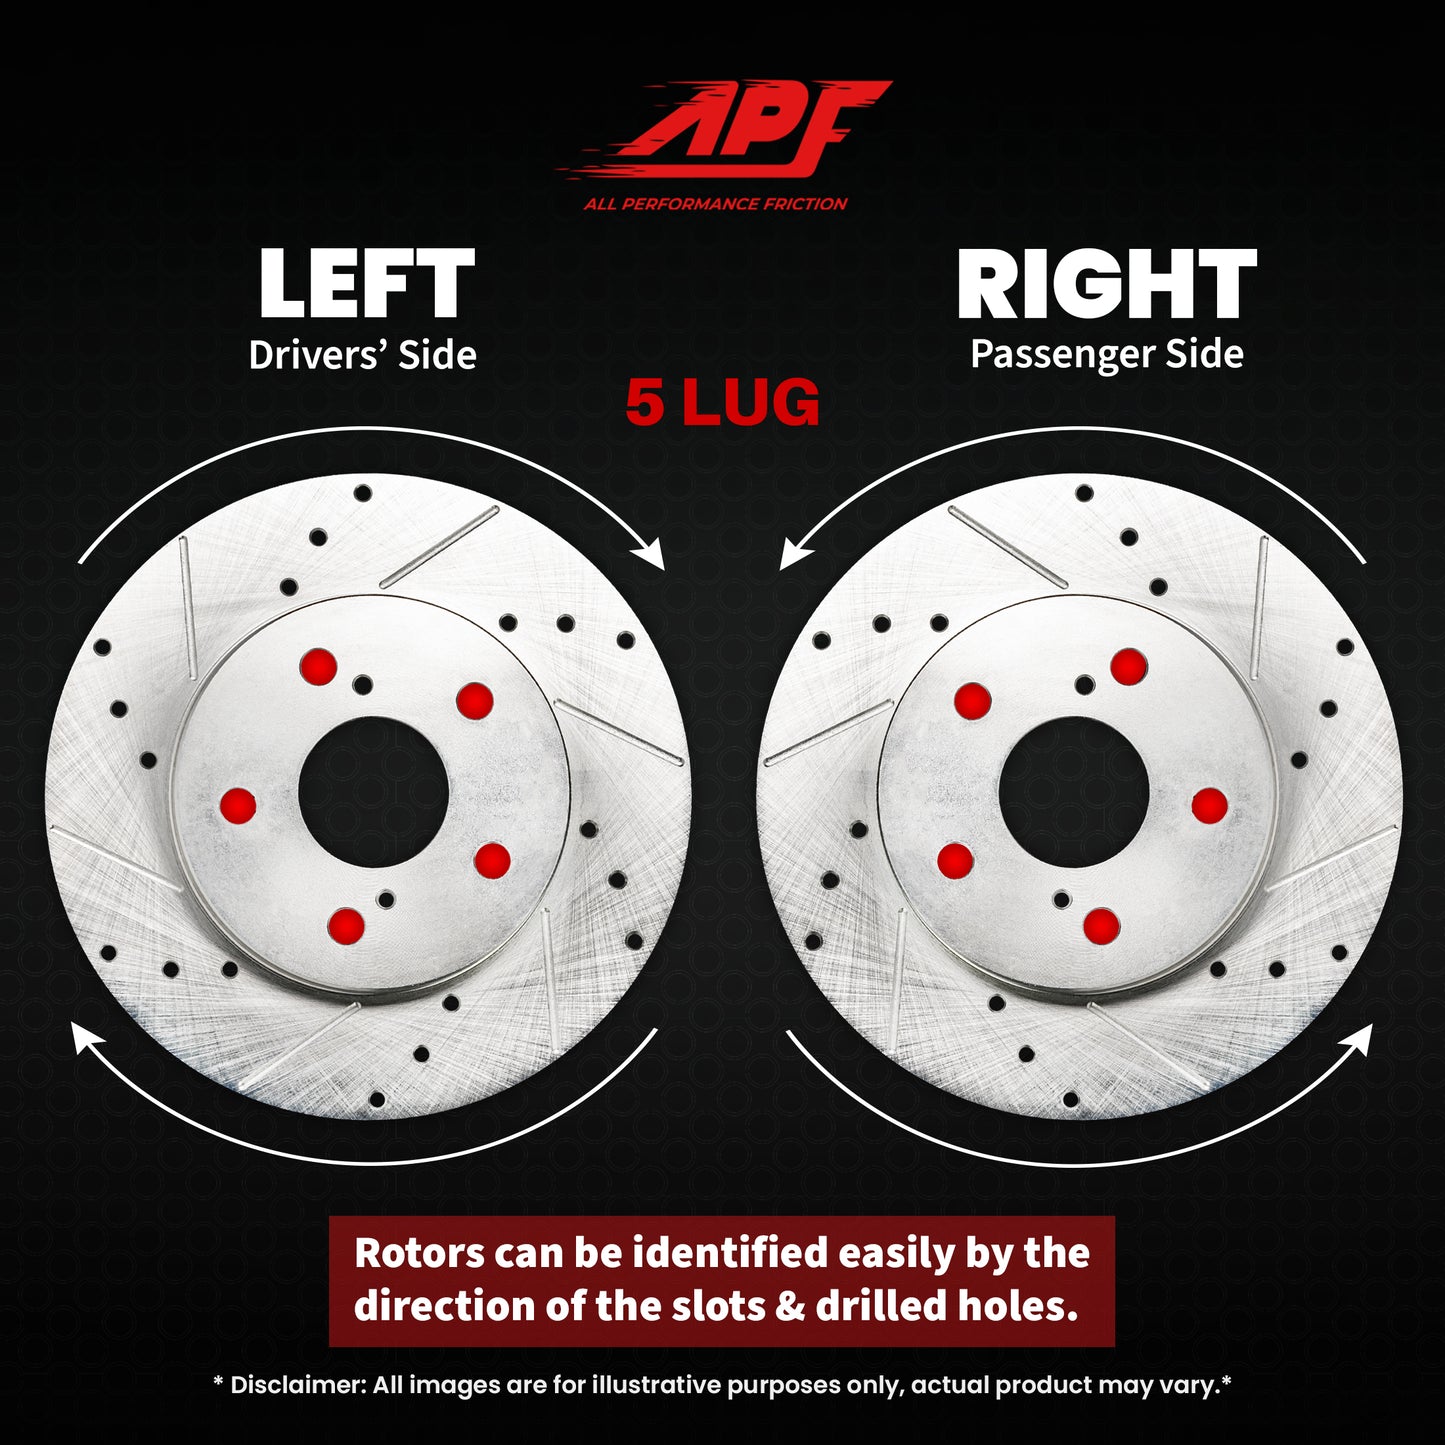 APF All Performance Friction Front and Rear Rotors and Pads Full Kit compatible with Acura RSX 2002-2006 Zinc Drilled Slotted Rotors with Ceramic Carbon Fiber Brake Pads | $345.06